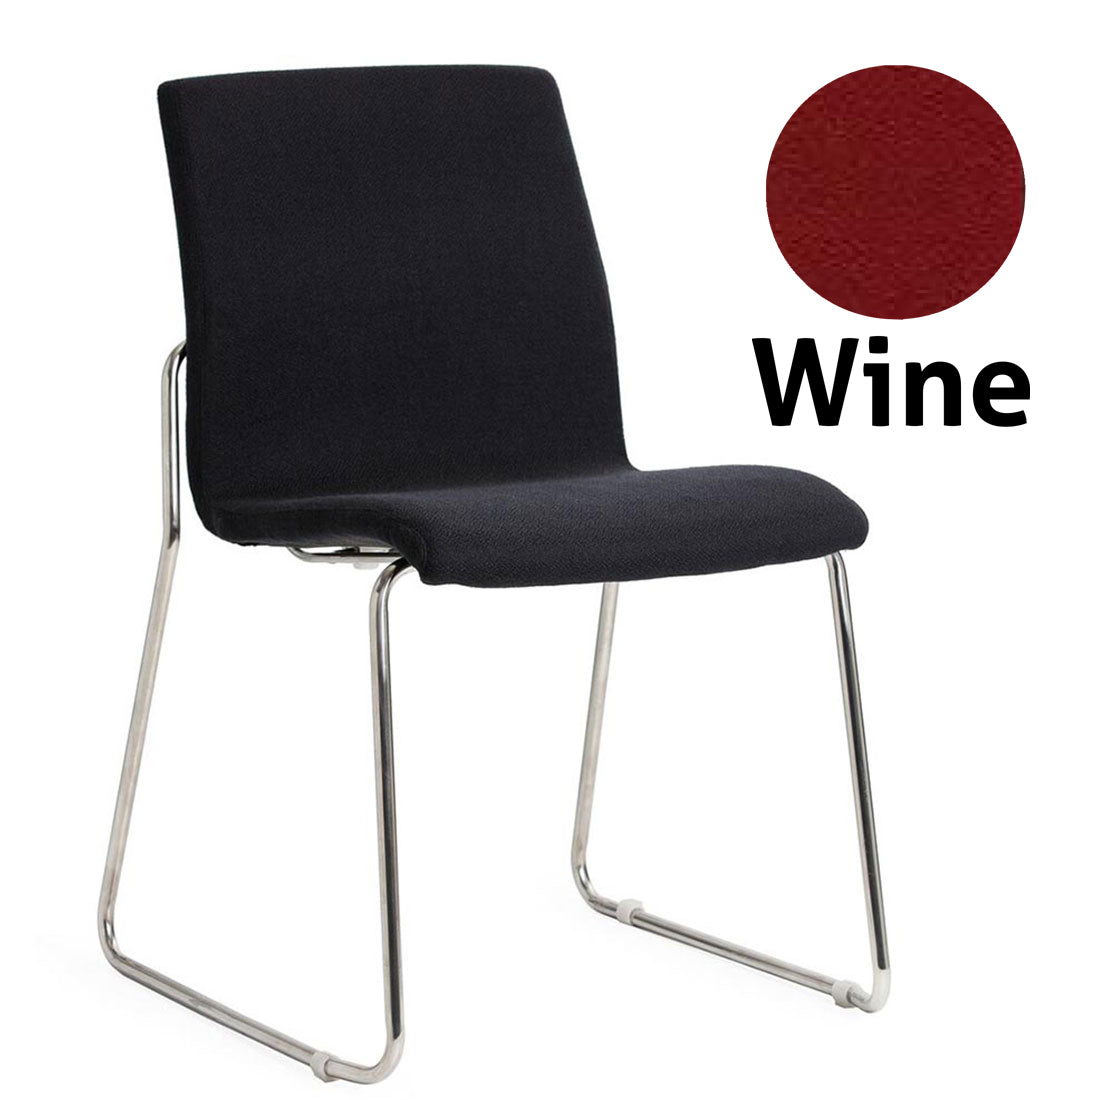 Design Visitor Chair - switchoffice.com.au